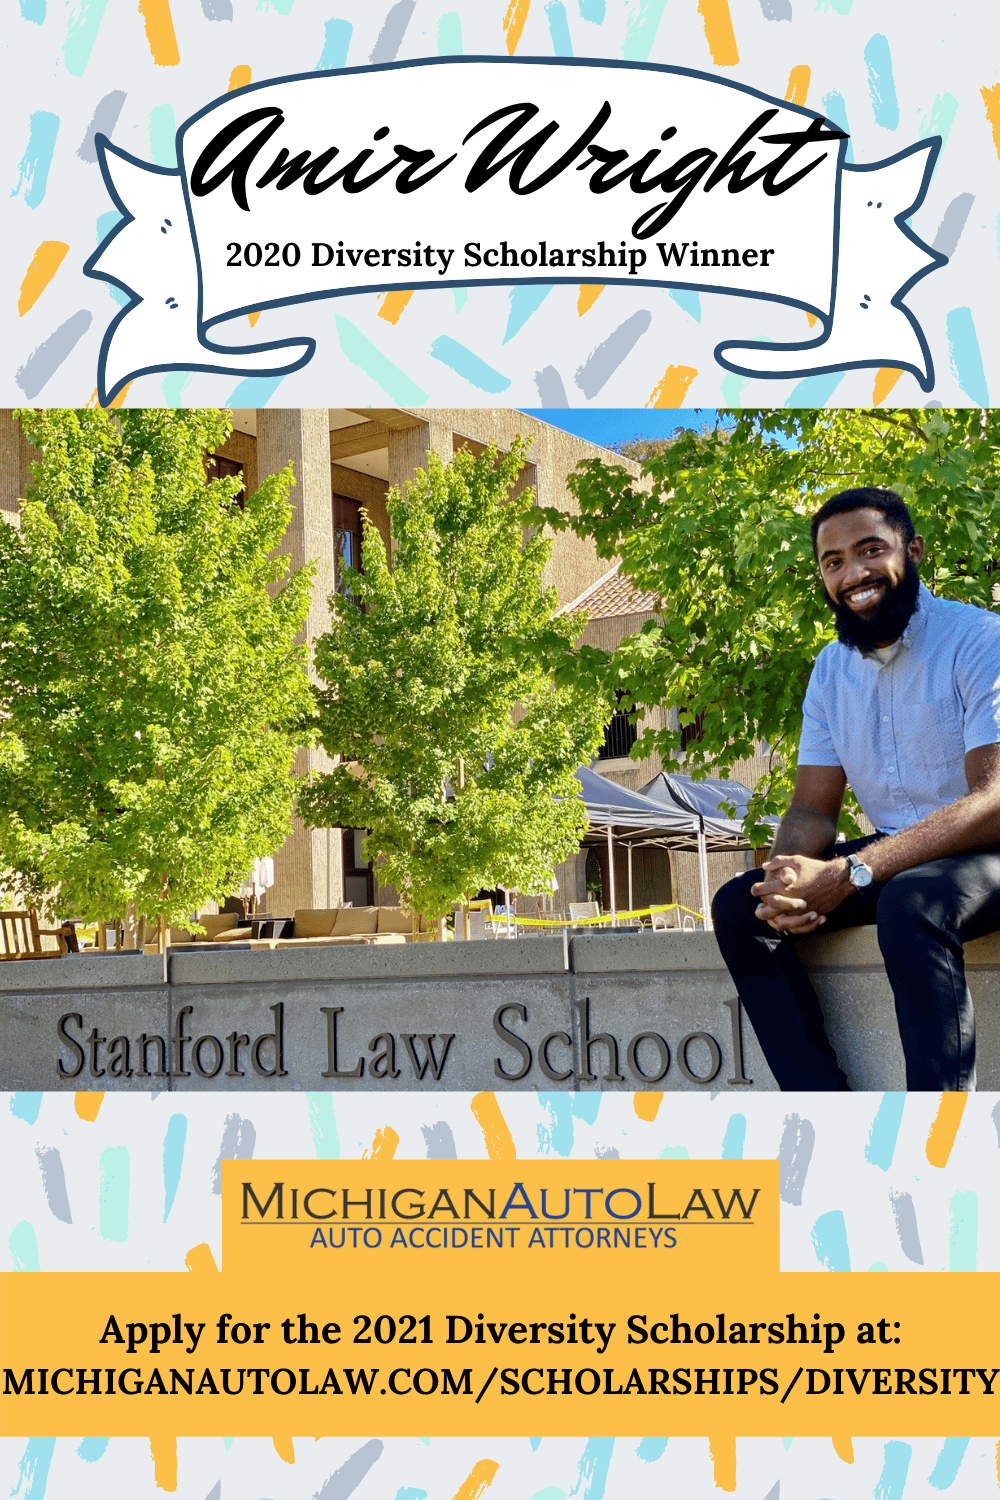 Winner announced for the Michigan Auto Law 2020 Law Student Diversity Scholarship